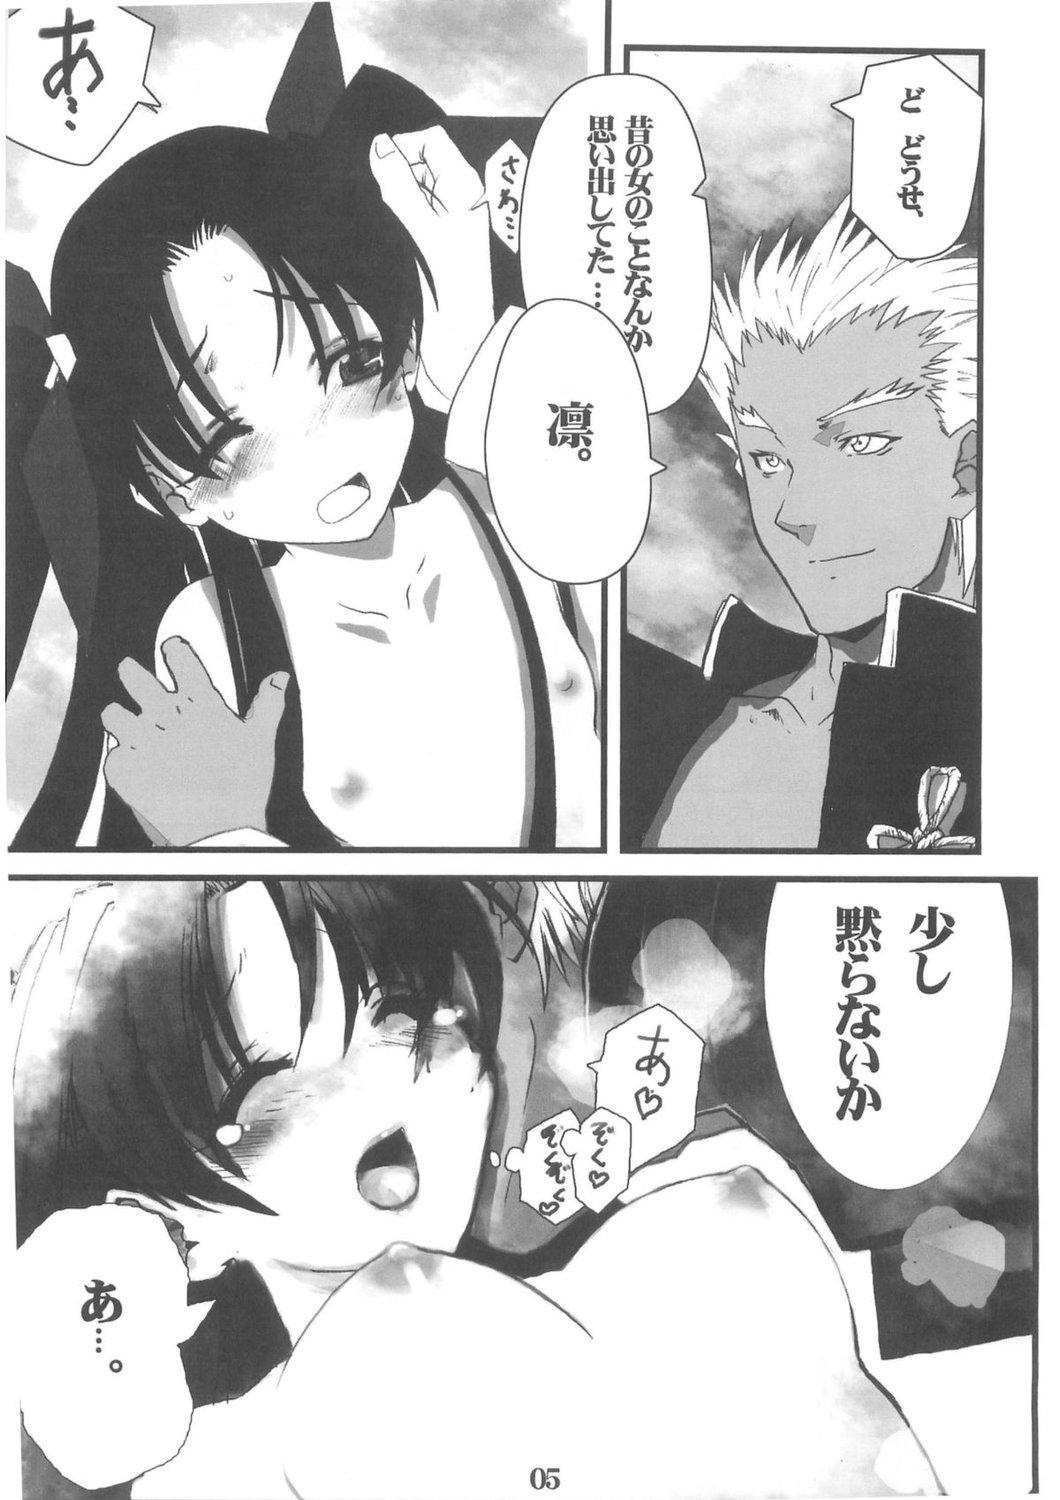 Puto Berry Berry - Fate stay night Boys - Page 5